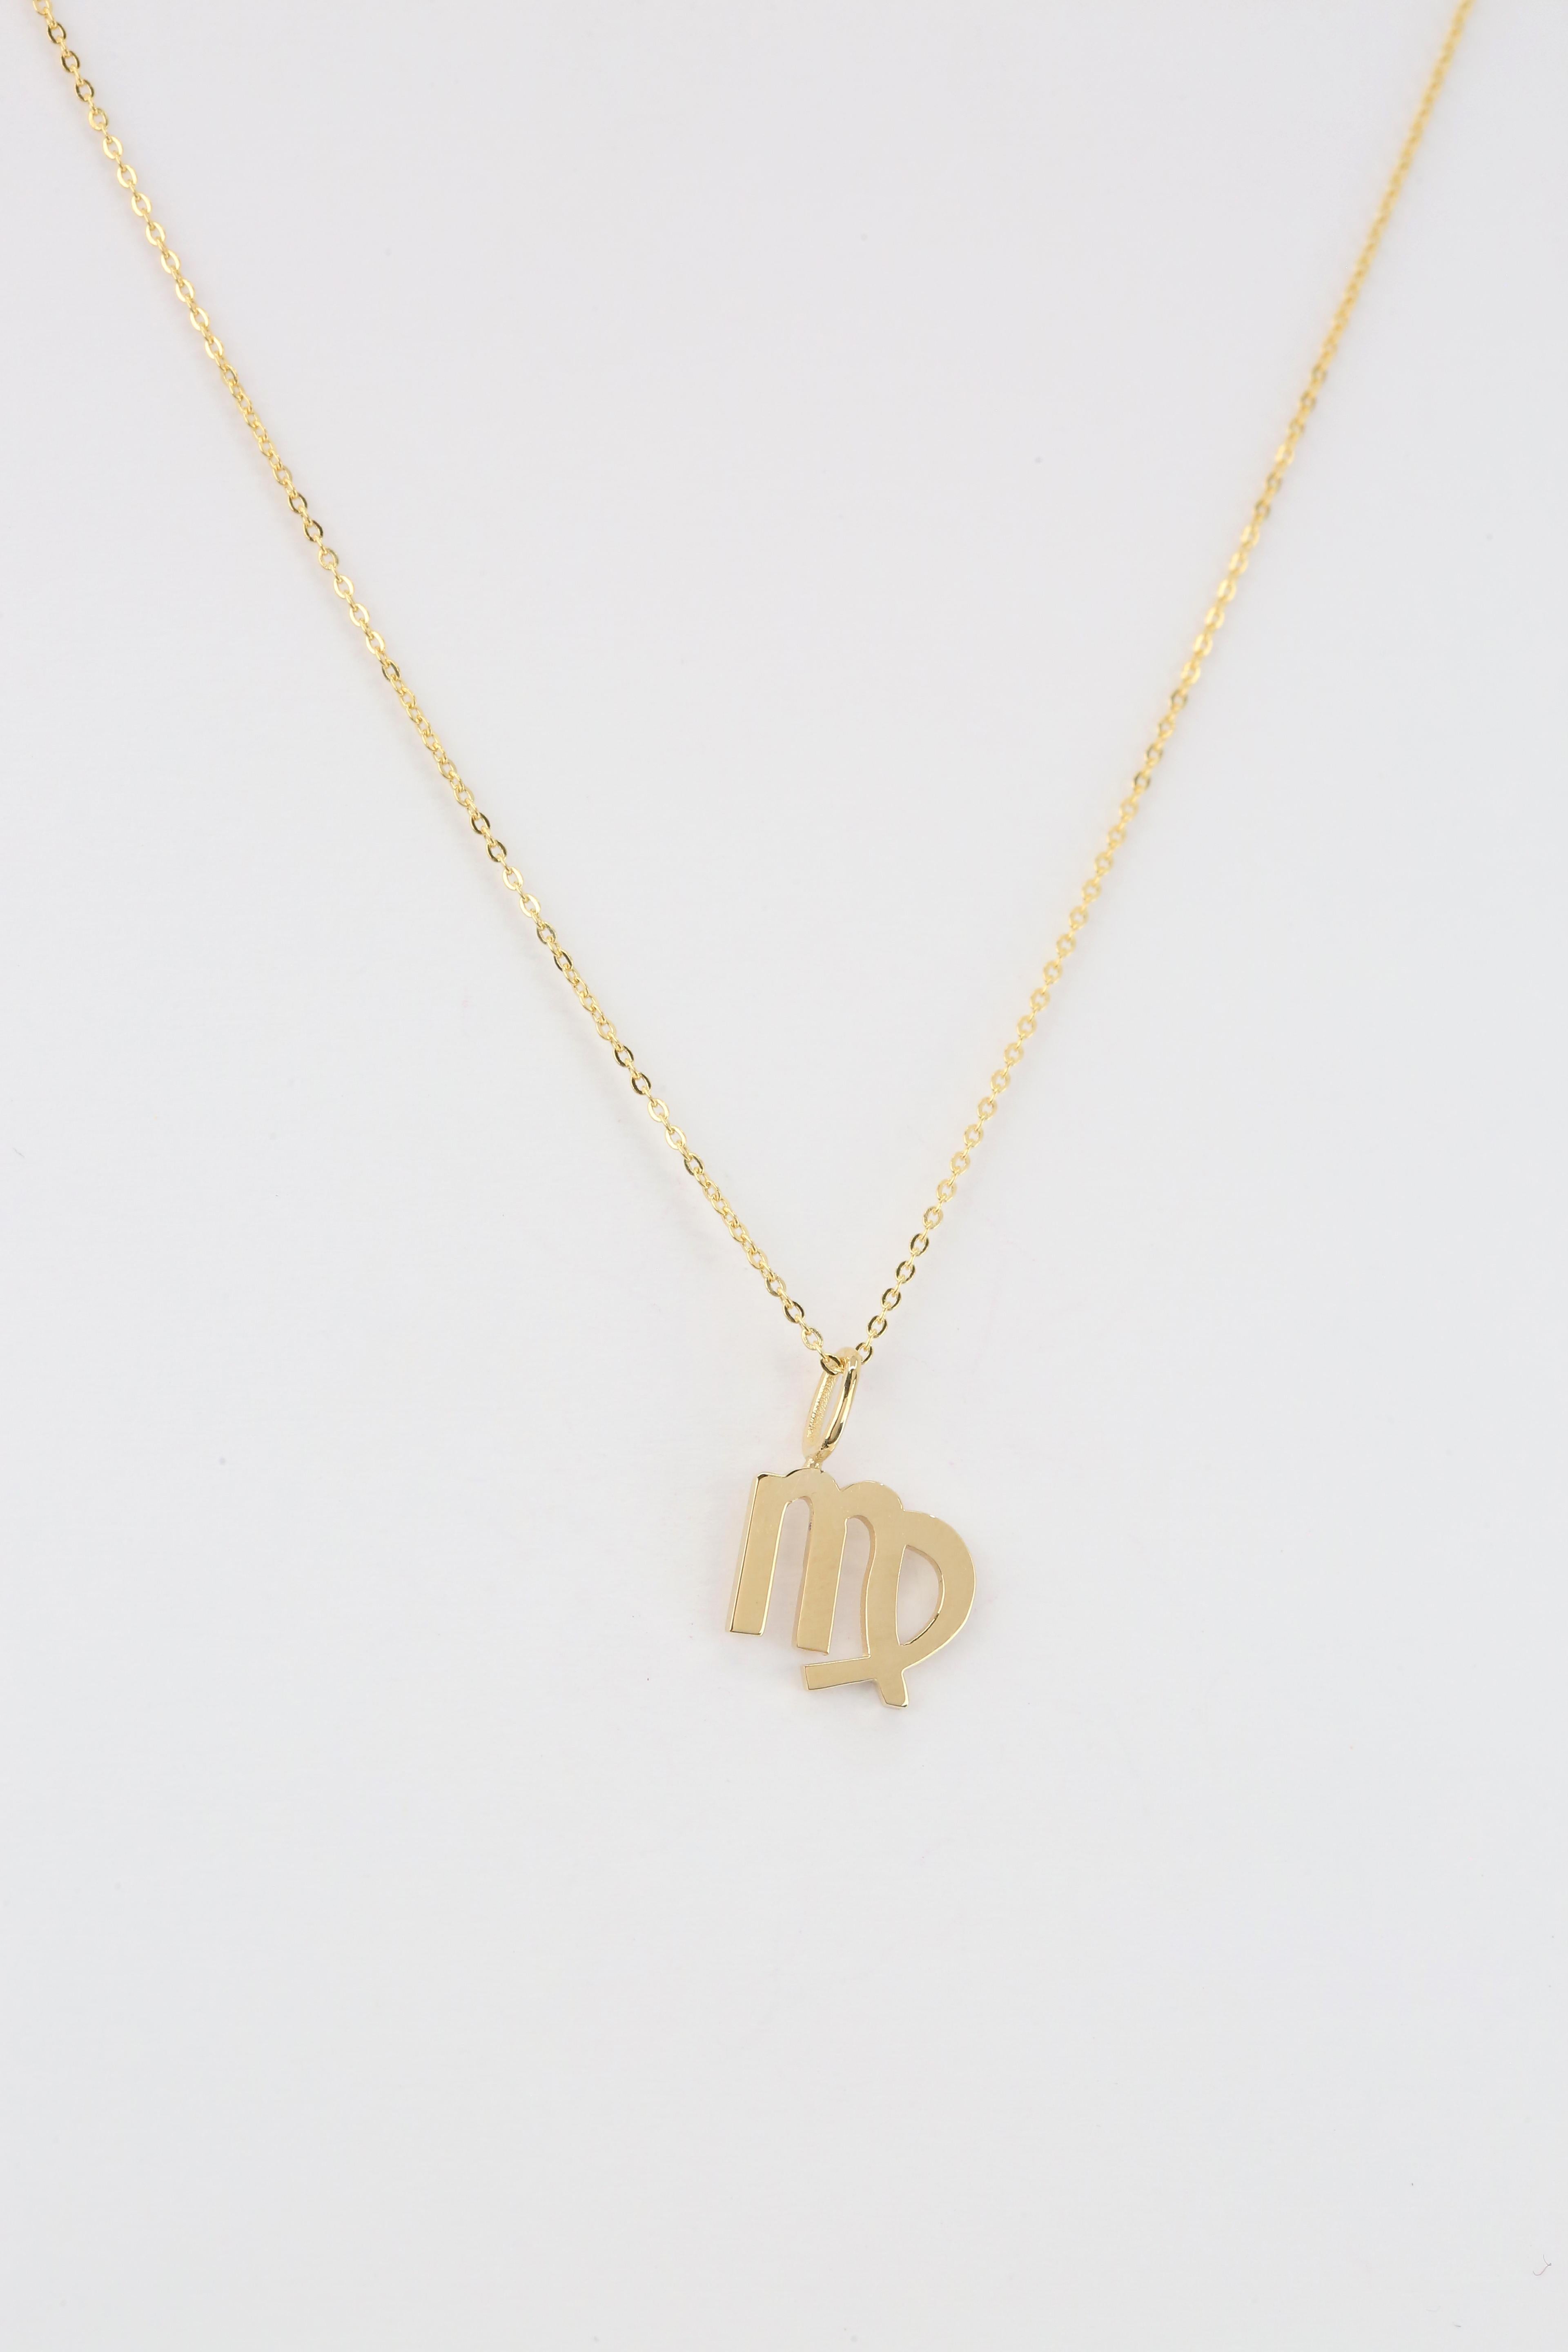 14k Gold Necklace Virgo Sign Symbol Horoscope Collection Necklace

*The product is the Virgo Zodiac Sign.

It’s a manual labour product. ‘Handmade’. Fashionable product. 

This necklace was made with quality materials and excellent handwork. I